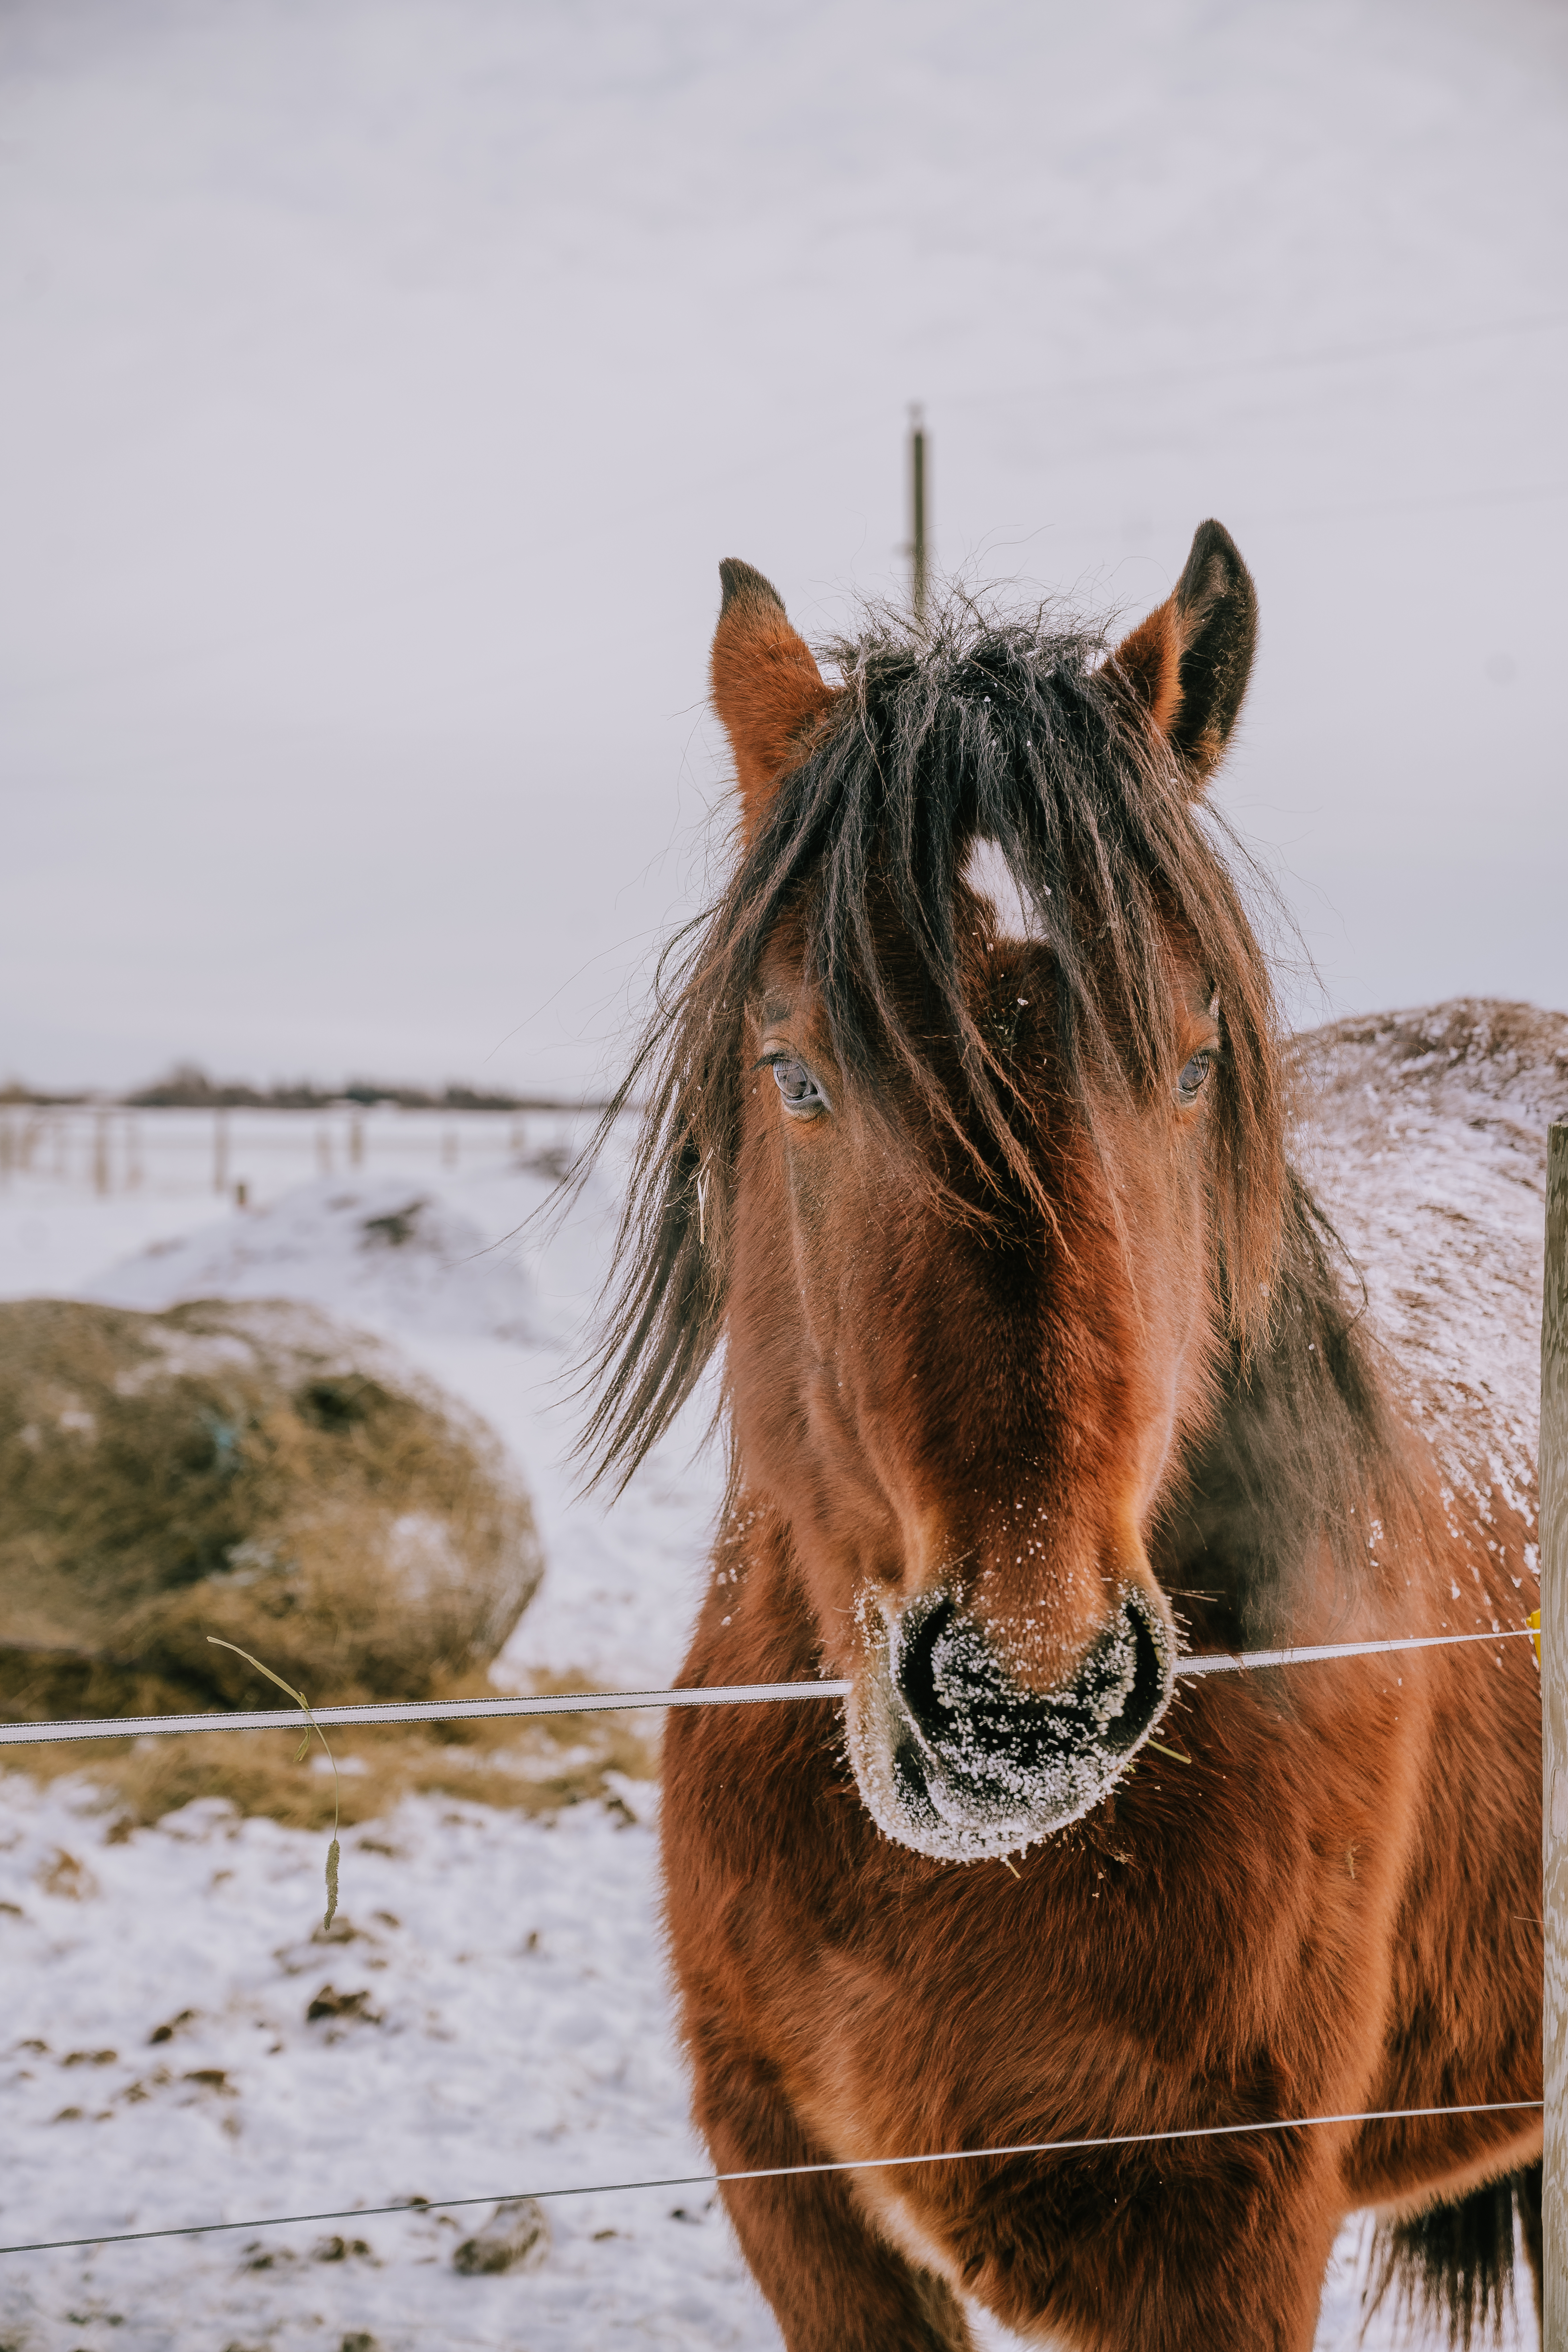 A horse with a frosty mane looks directly at the camera through a wire fence, with a wintry farm landscape behind it.